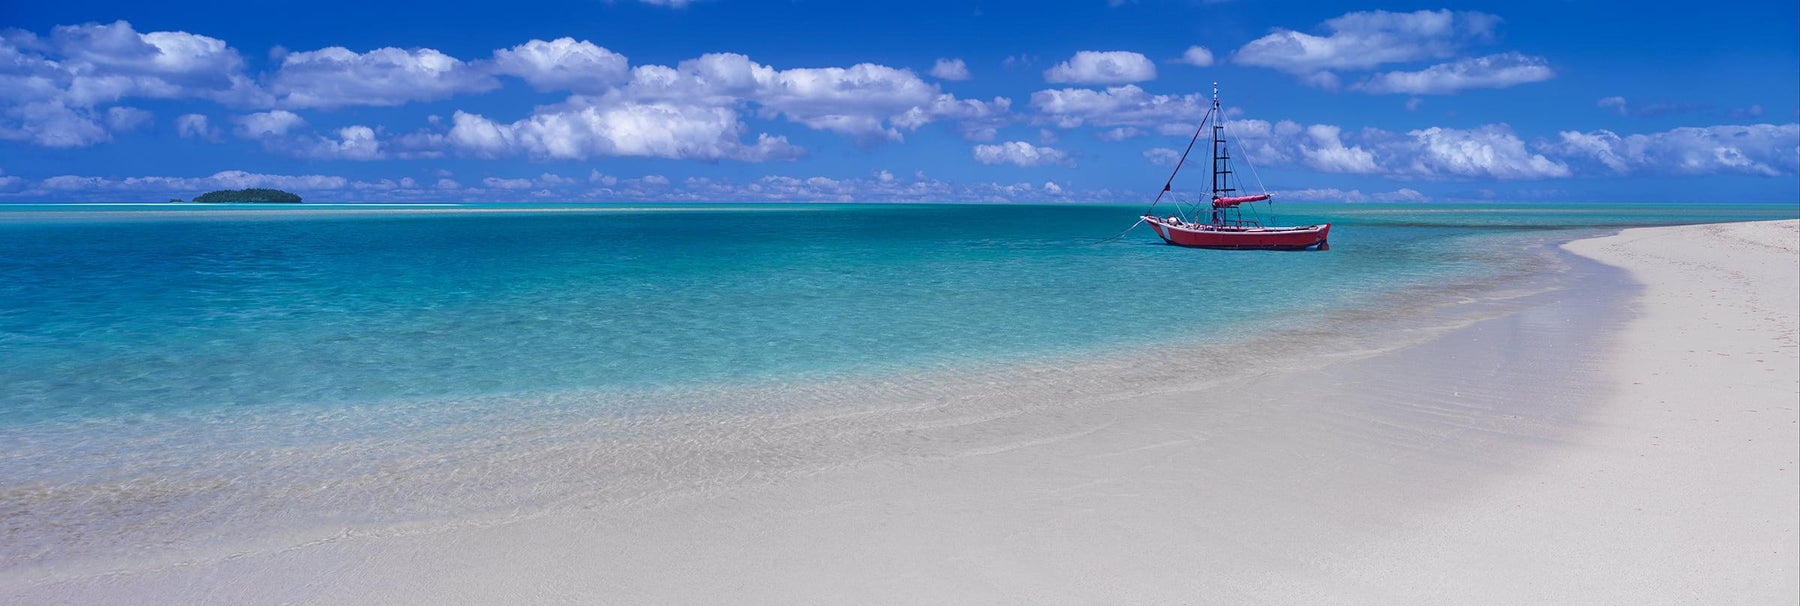 Red sail boat floating in the turquoise ocean just off a white sand beach in the Great Barrier Reef of Australia